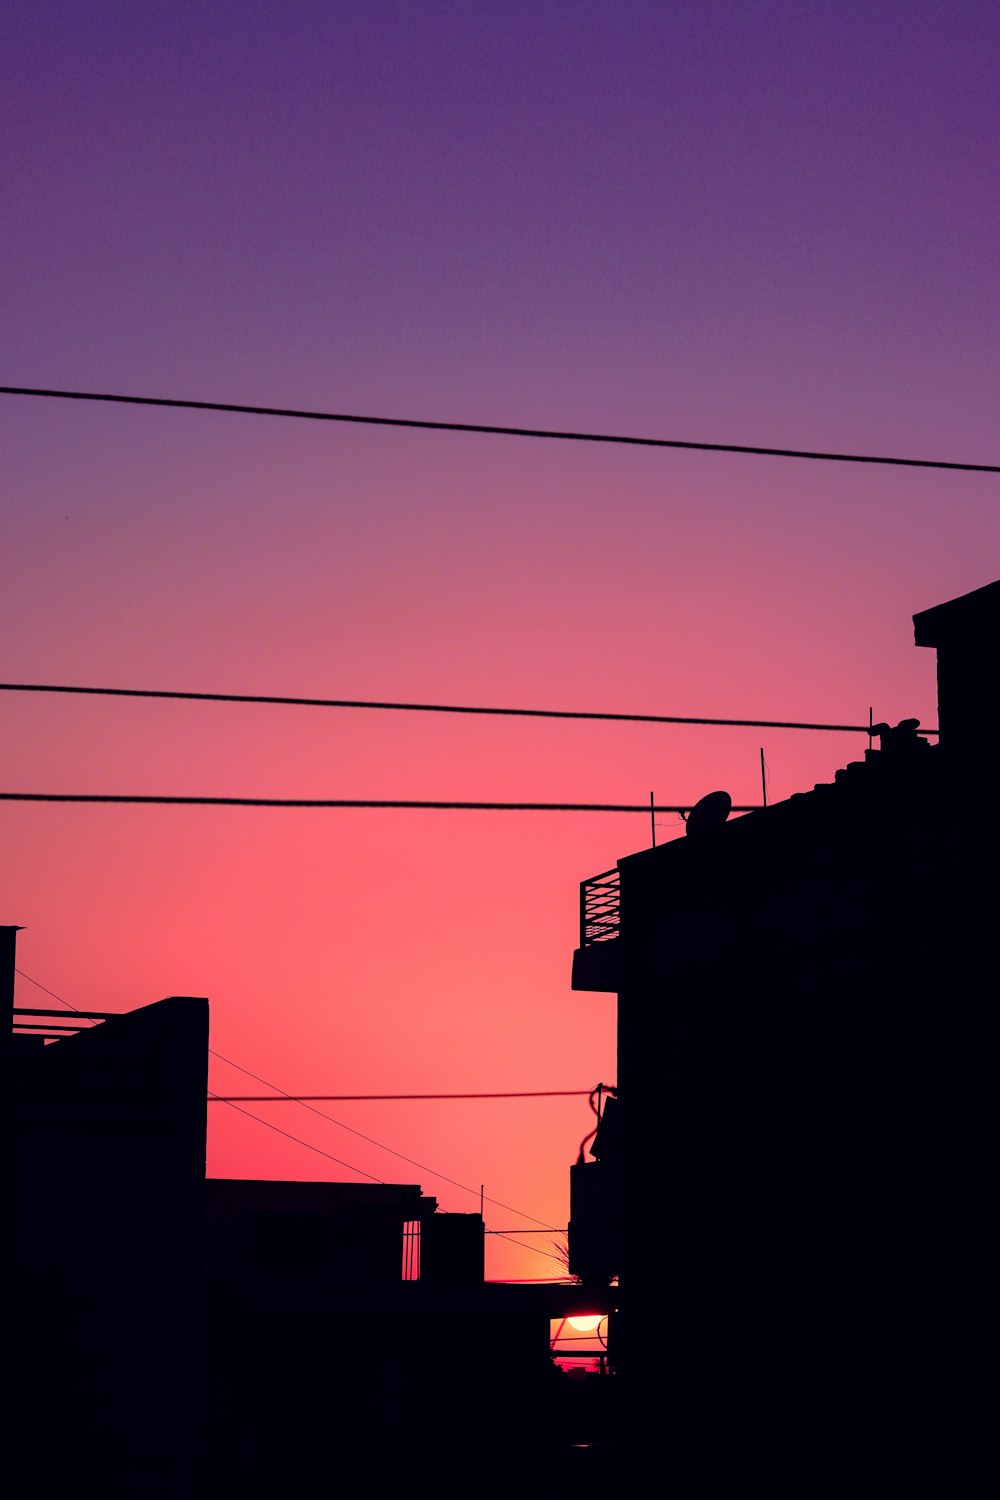 the sun is setting behind a building with power lines in the foreground